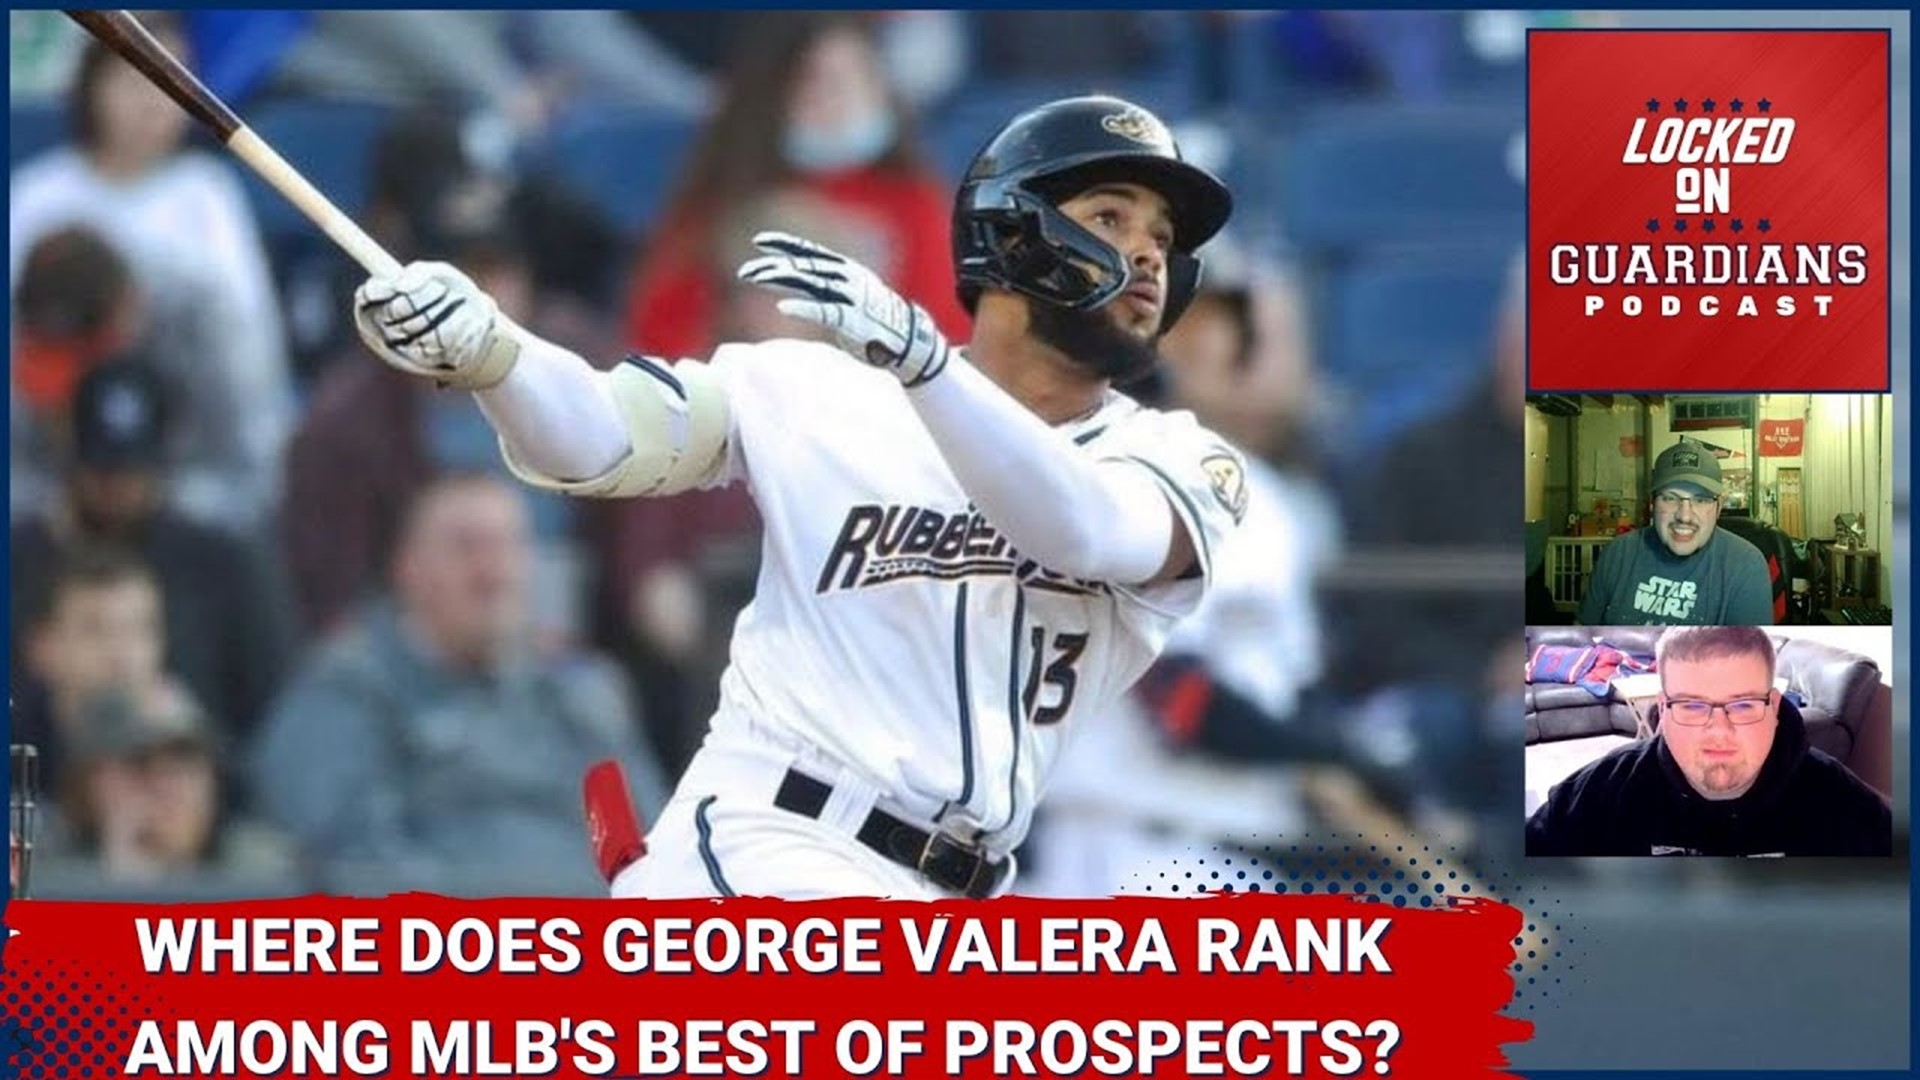 We go deeper on Valera as a prospect with more updates in this edition of the Locked On Guardians podcast.